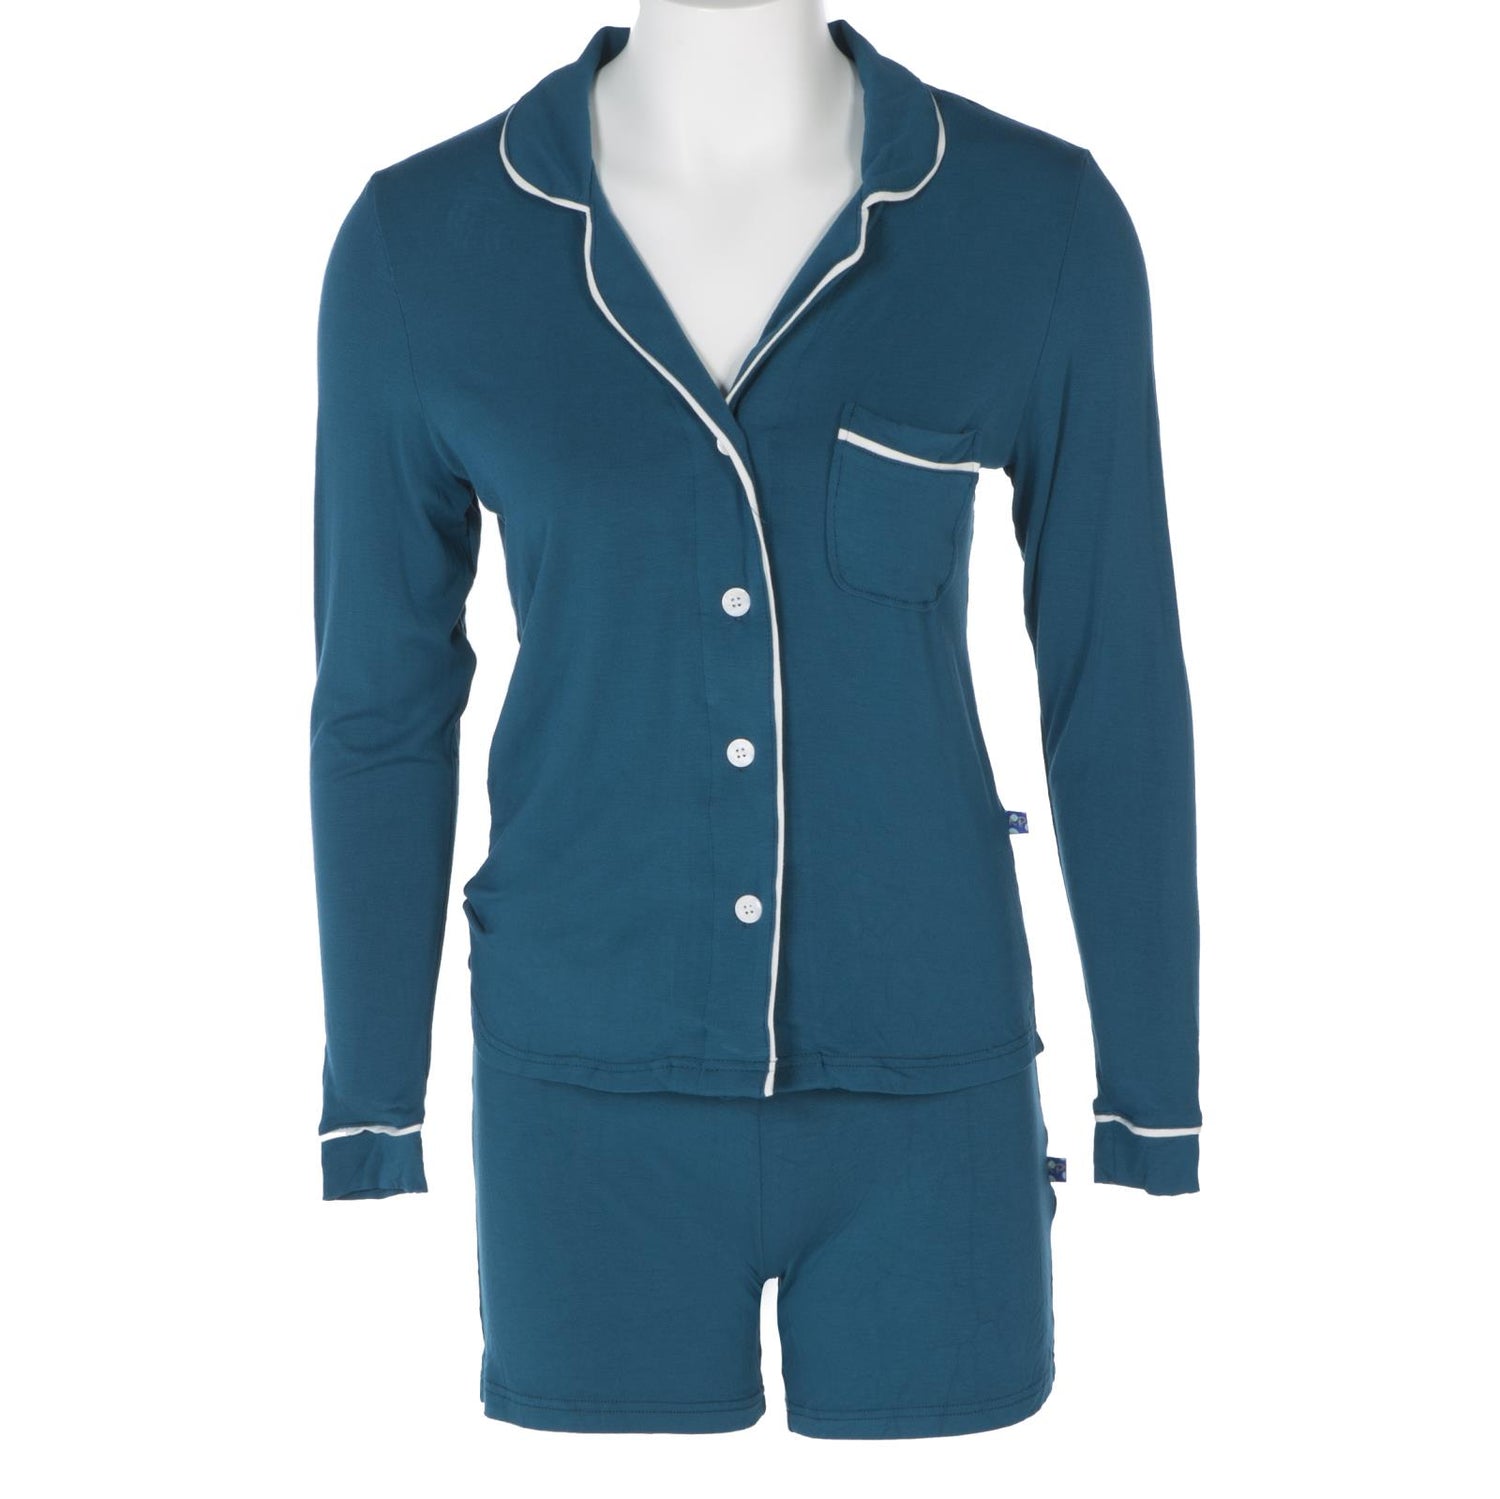 Women's Collared Pajama Set with Shorts in Heritage Blue with Natural Trim